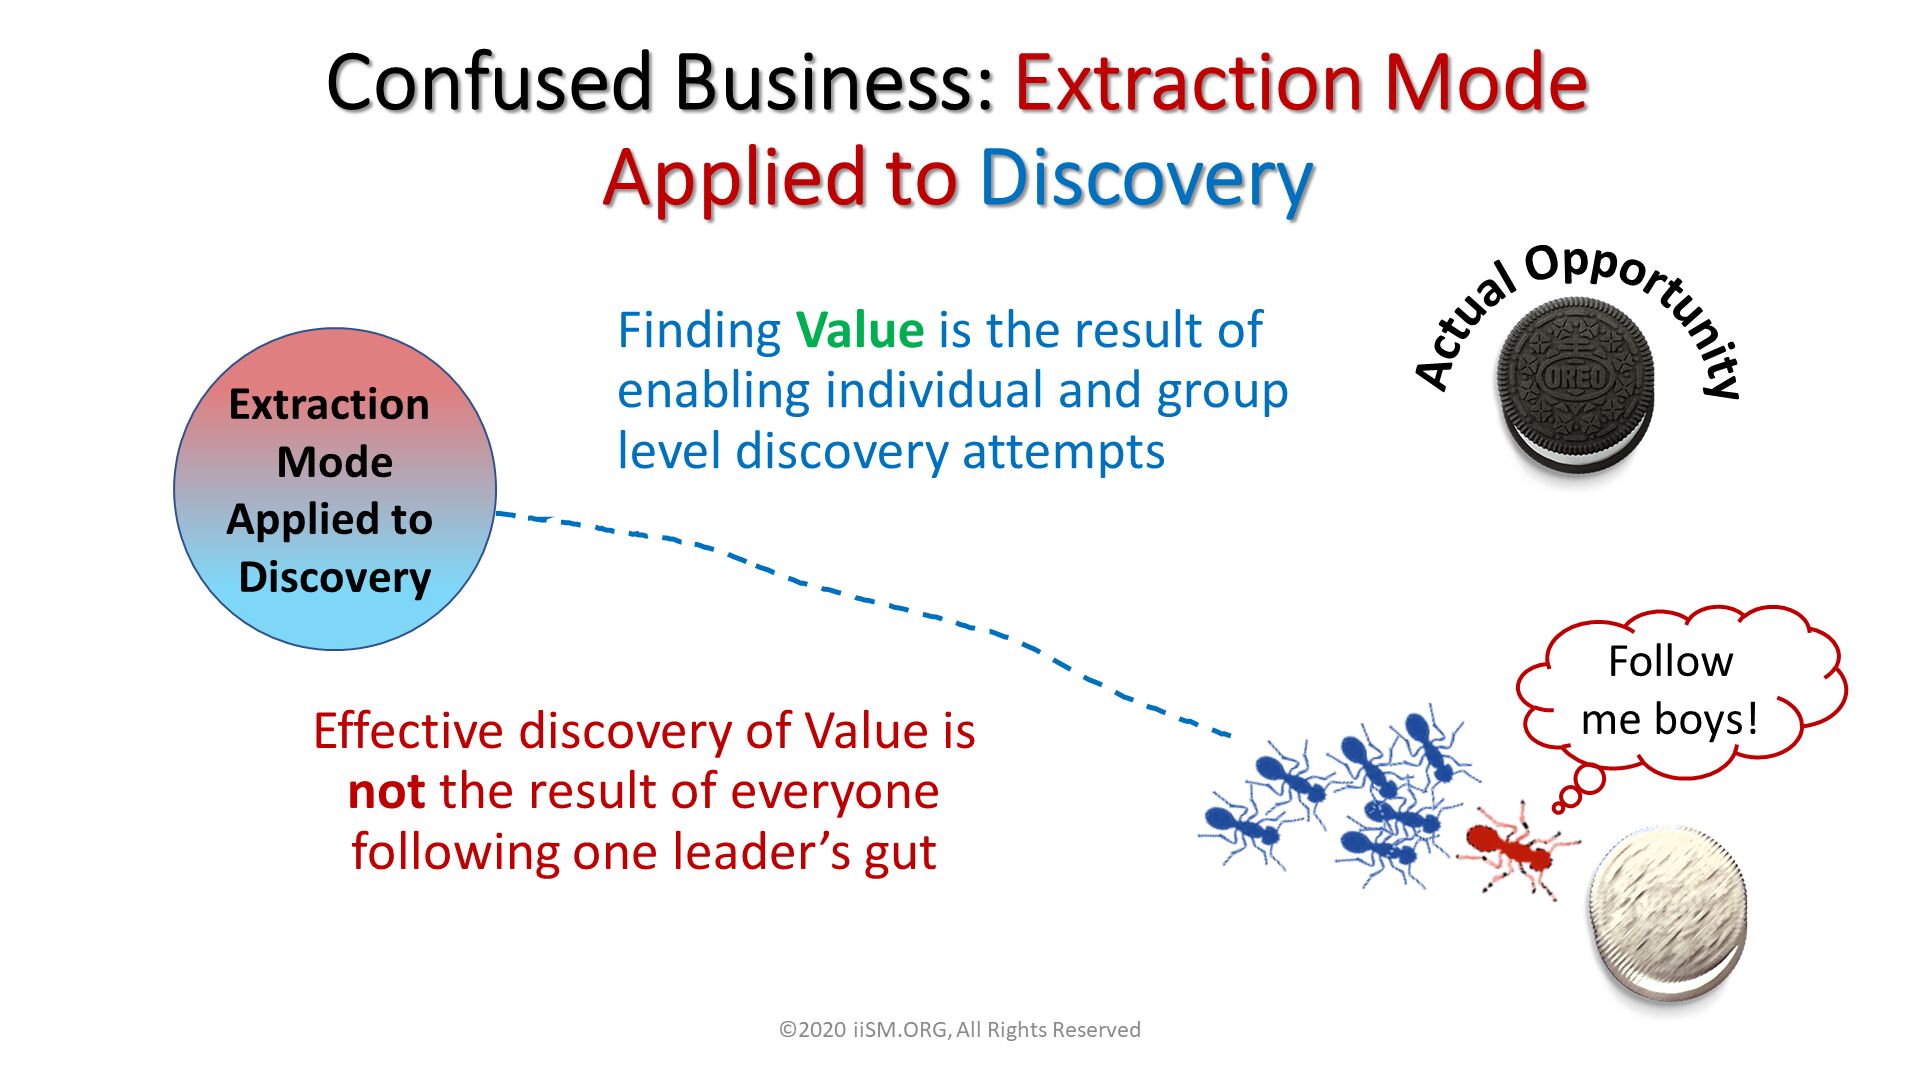  Actual Opportunity. Confused Business: Extraction Mode Applied to Discovery. Finding Value is the result of enabling individual and group level discovery attempts. ©2020 iiSM.ORG, All Rights Reserved. Extraction Mode
Applied to 
Discovery. Follow me boys!. Effective discovery of Value is not the result of everyone following one leader’s gut. 